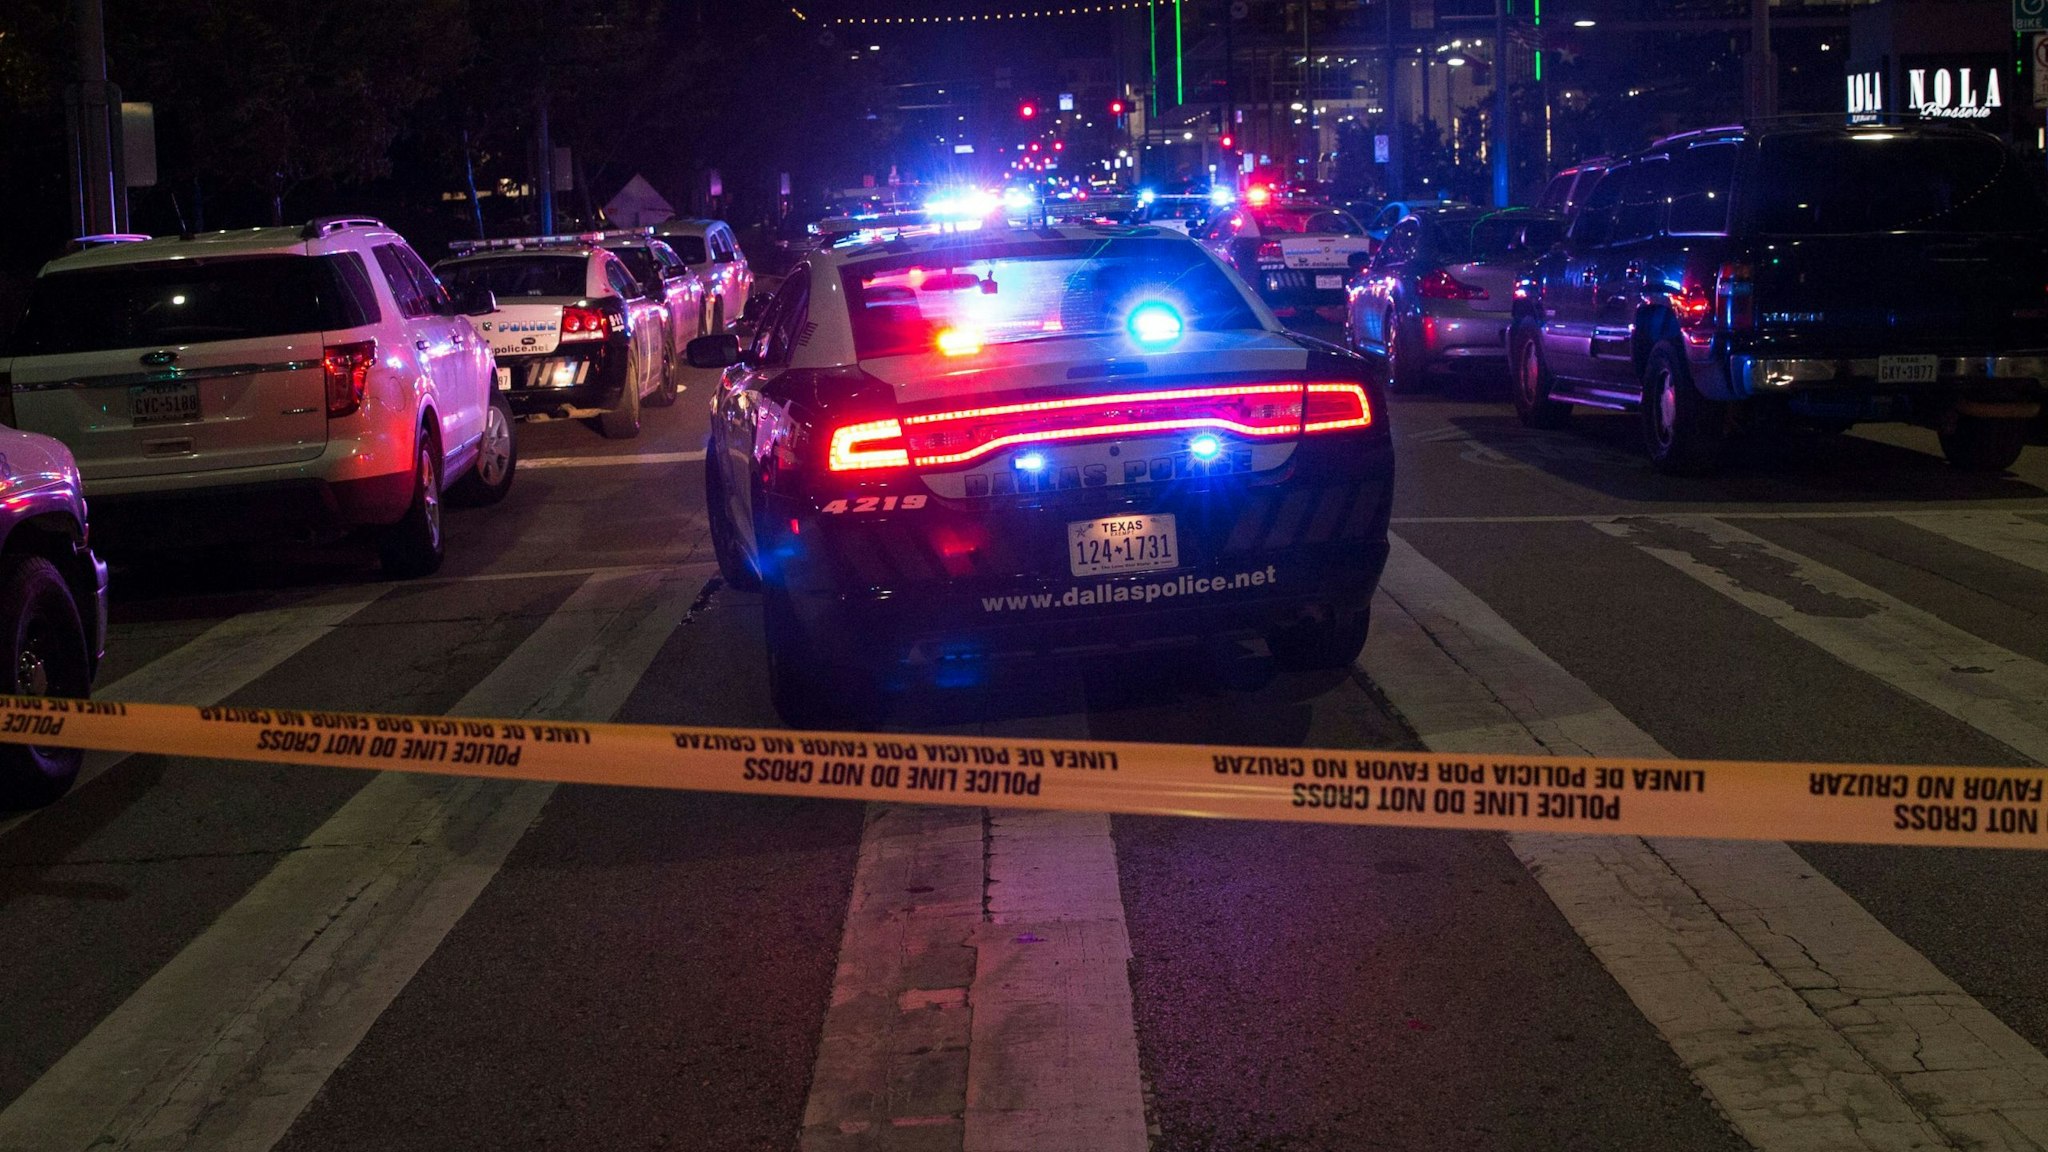 TOPSHOT - Police cars sit on Main Street in Dallas following the sniper shooting during a protest on July 7, 2016. - A fourth police officer was killed and two suspected snipers were in custody after a protest late Thursday against police brutality in Dallas, authorities said. One suspect had turned himself in and another who was in a shootout with SWAT officers was also in custody, the Dallas Police Department tweeted.